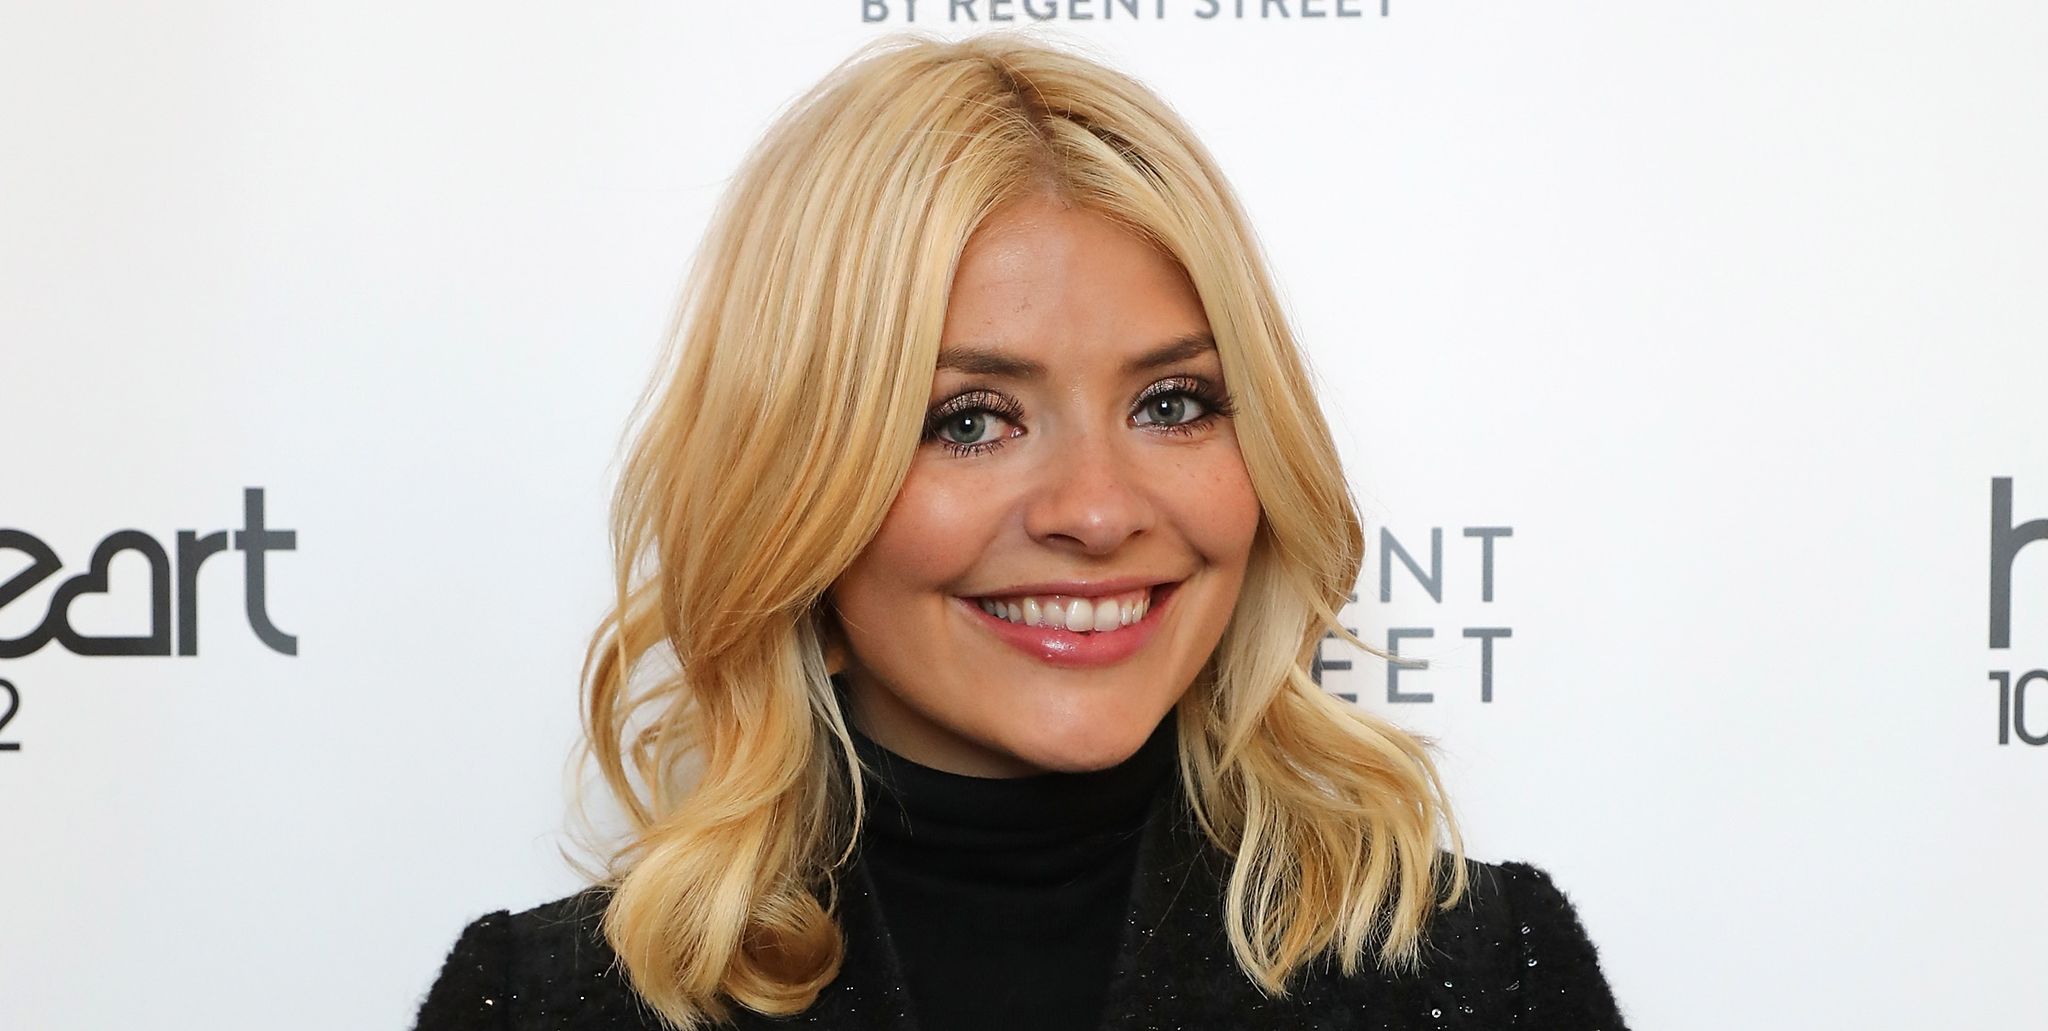 Holly Willoughby Switches On The Regent Street Christmas Lights 2016